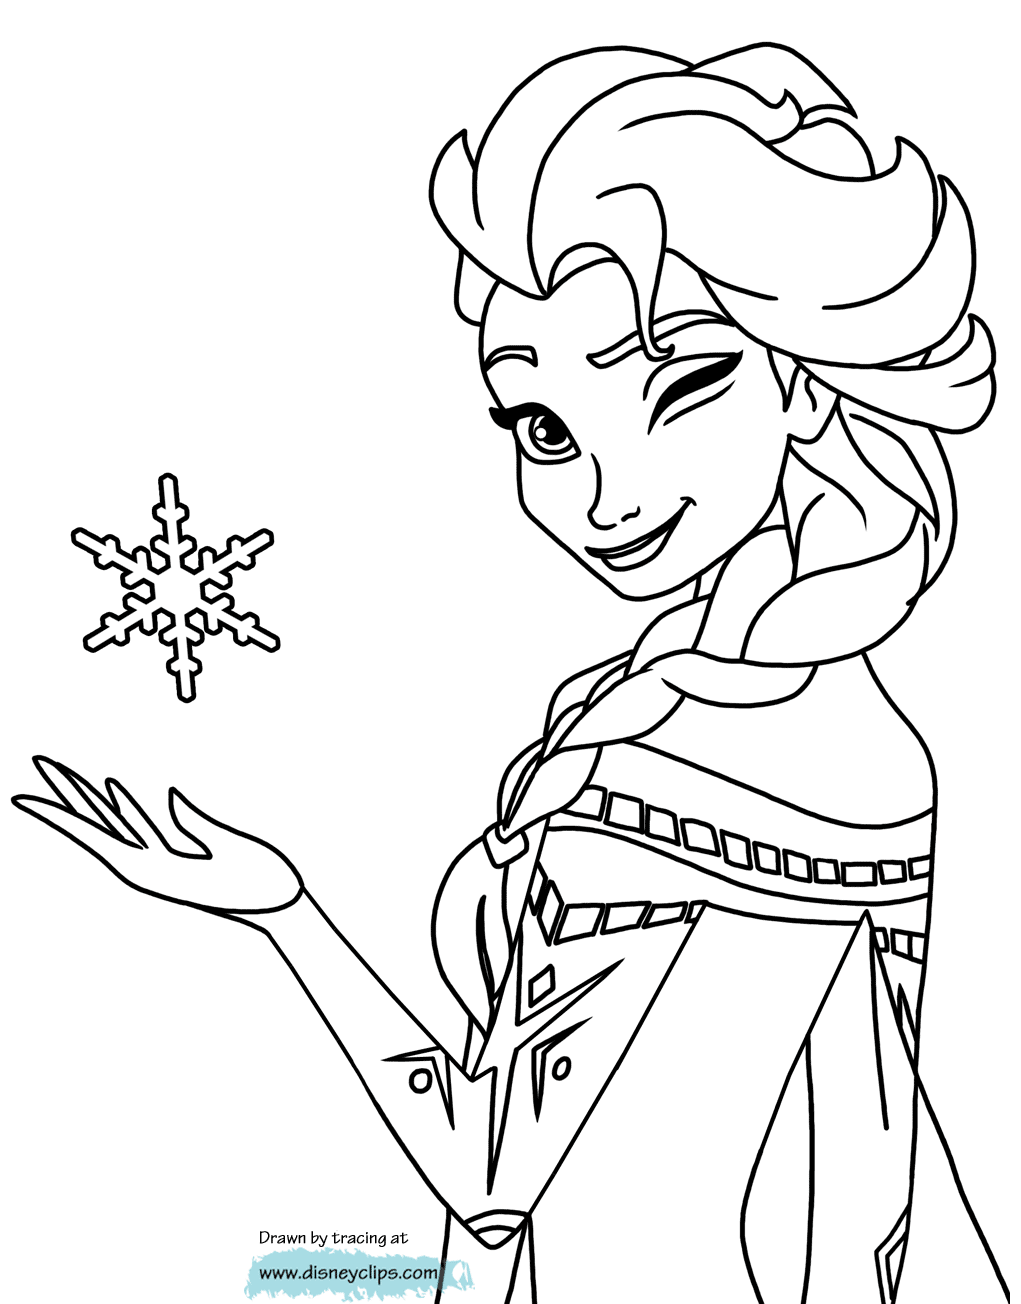 disney frozen colouring sheets disney frozen coloring pages to print for kids only sheets frozen colouring disney 